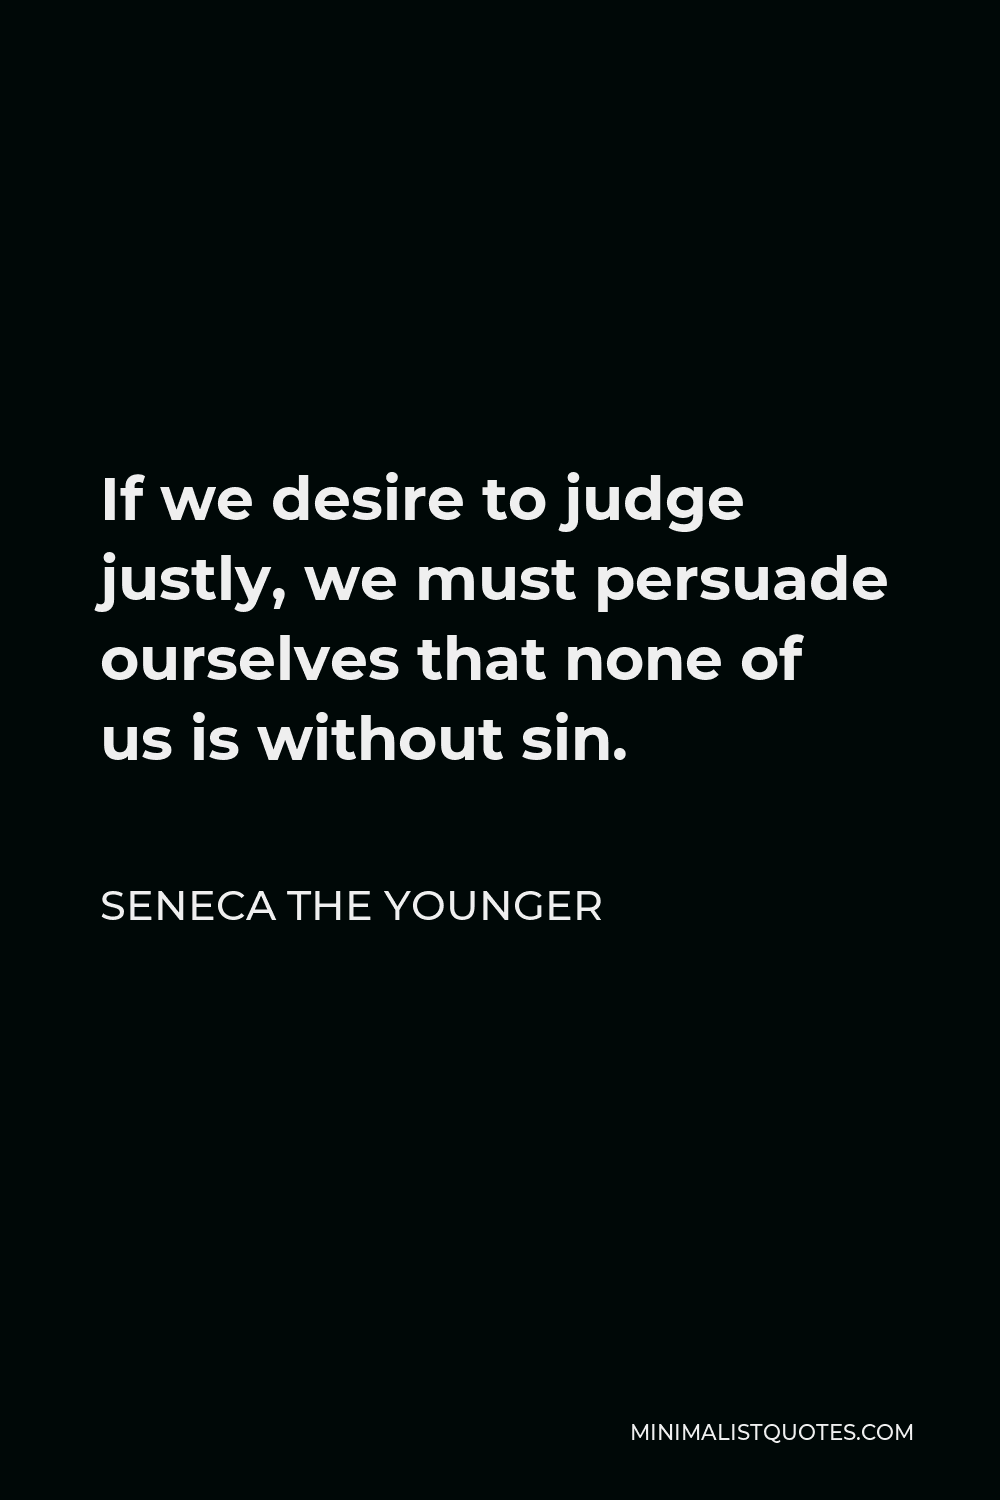 Seneca the Younger Quote - If we desire to judge justly, we must persuade ourselves that none of us is without sin.